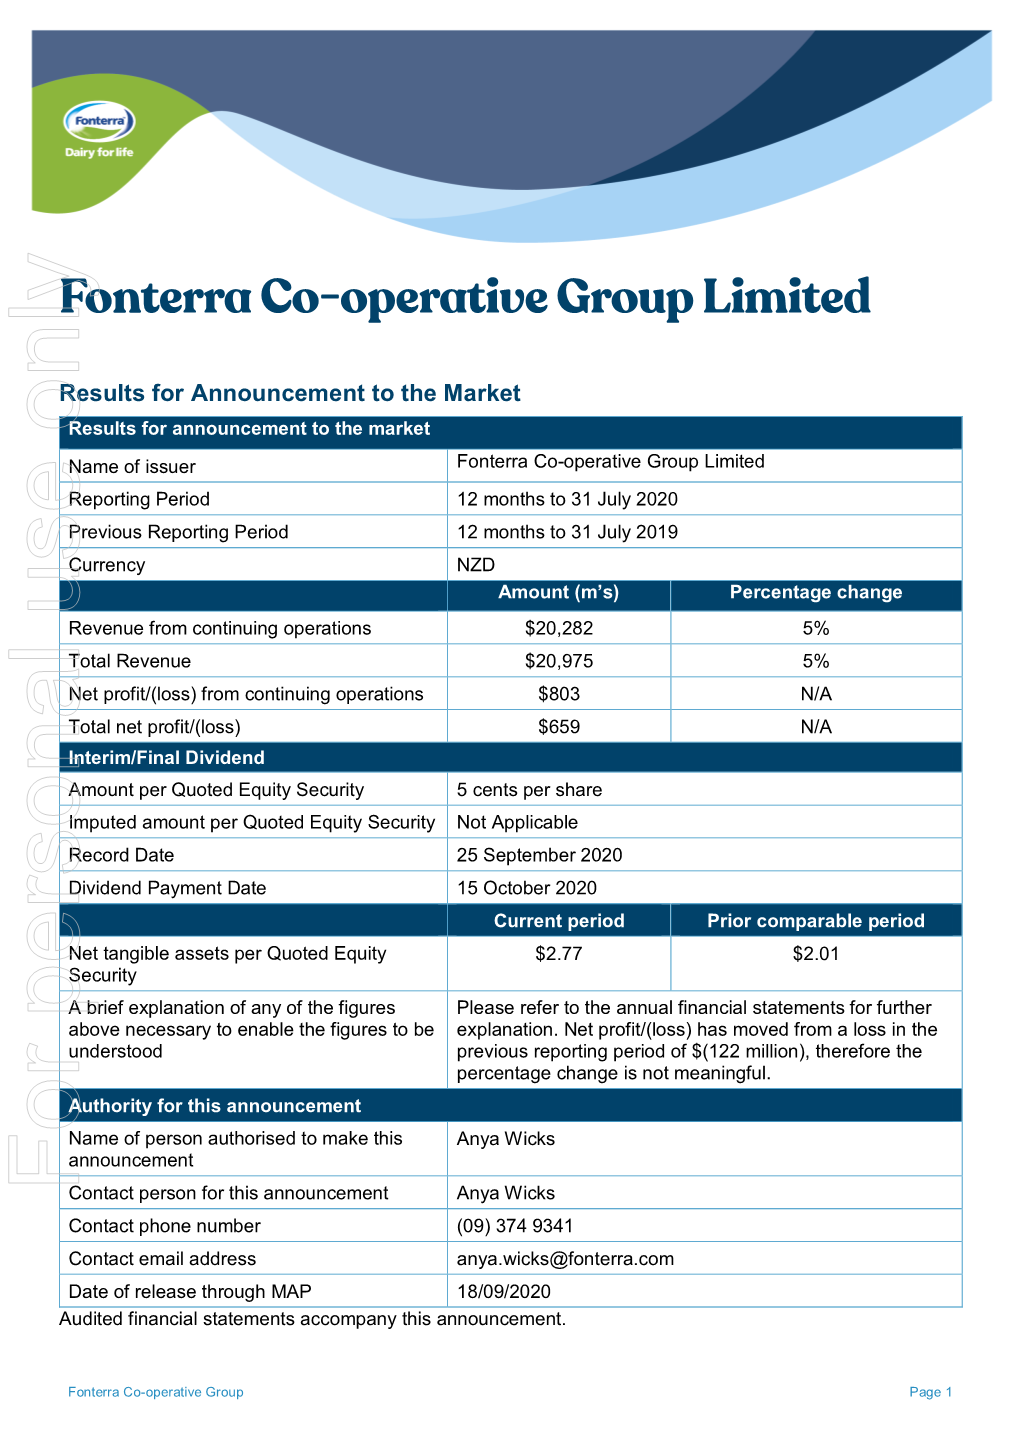 Fonterra Co-Operative Group Limited